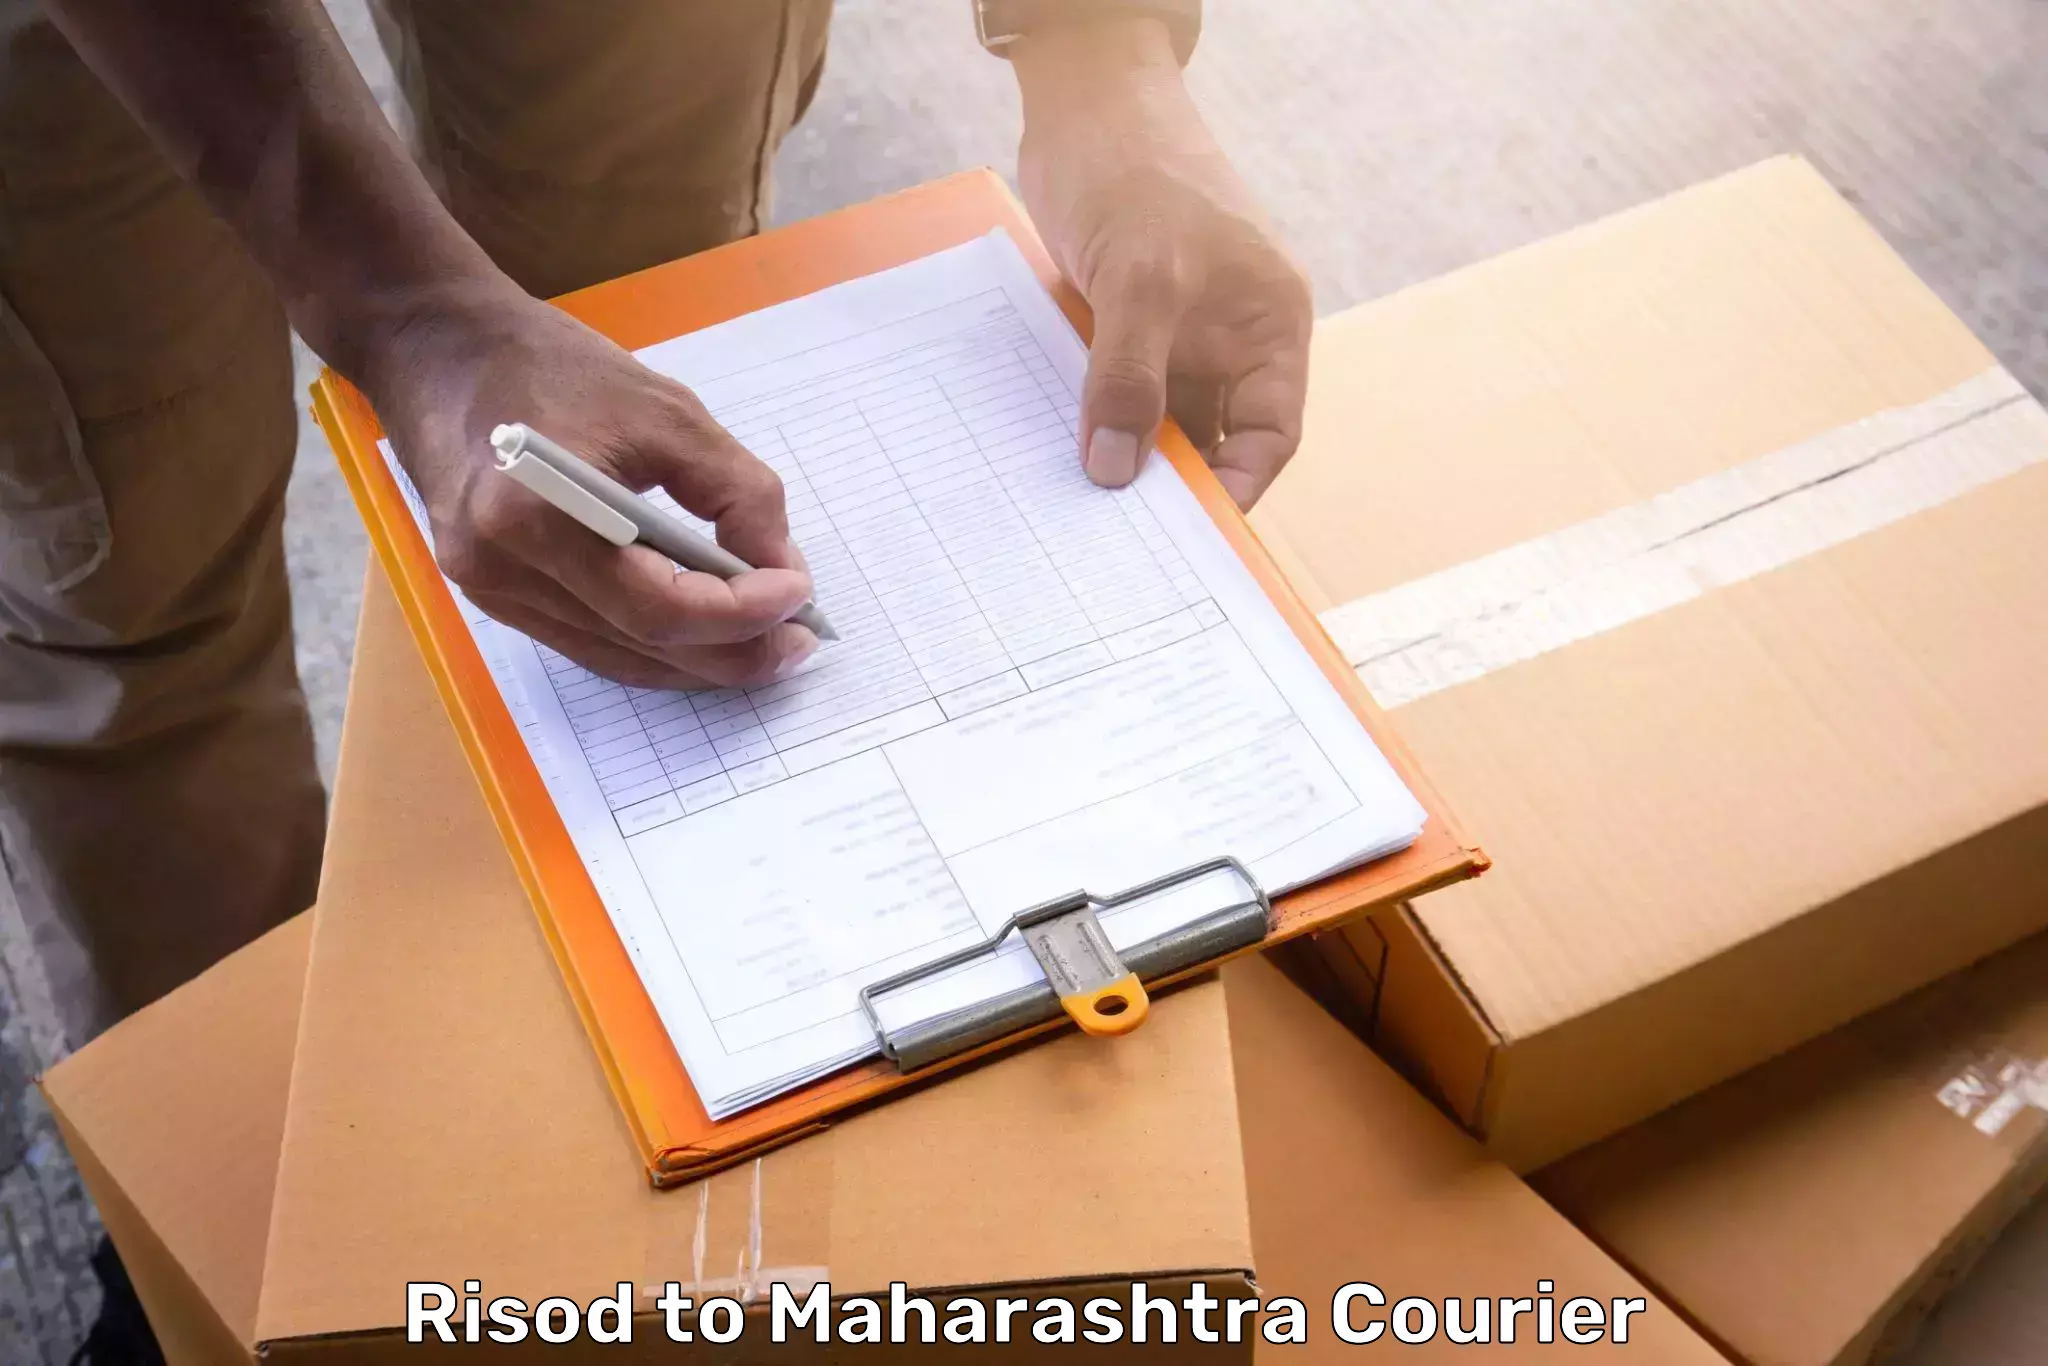 Instant baggage transport quote Risod to Maharashtra